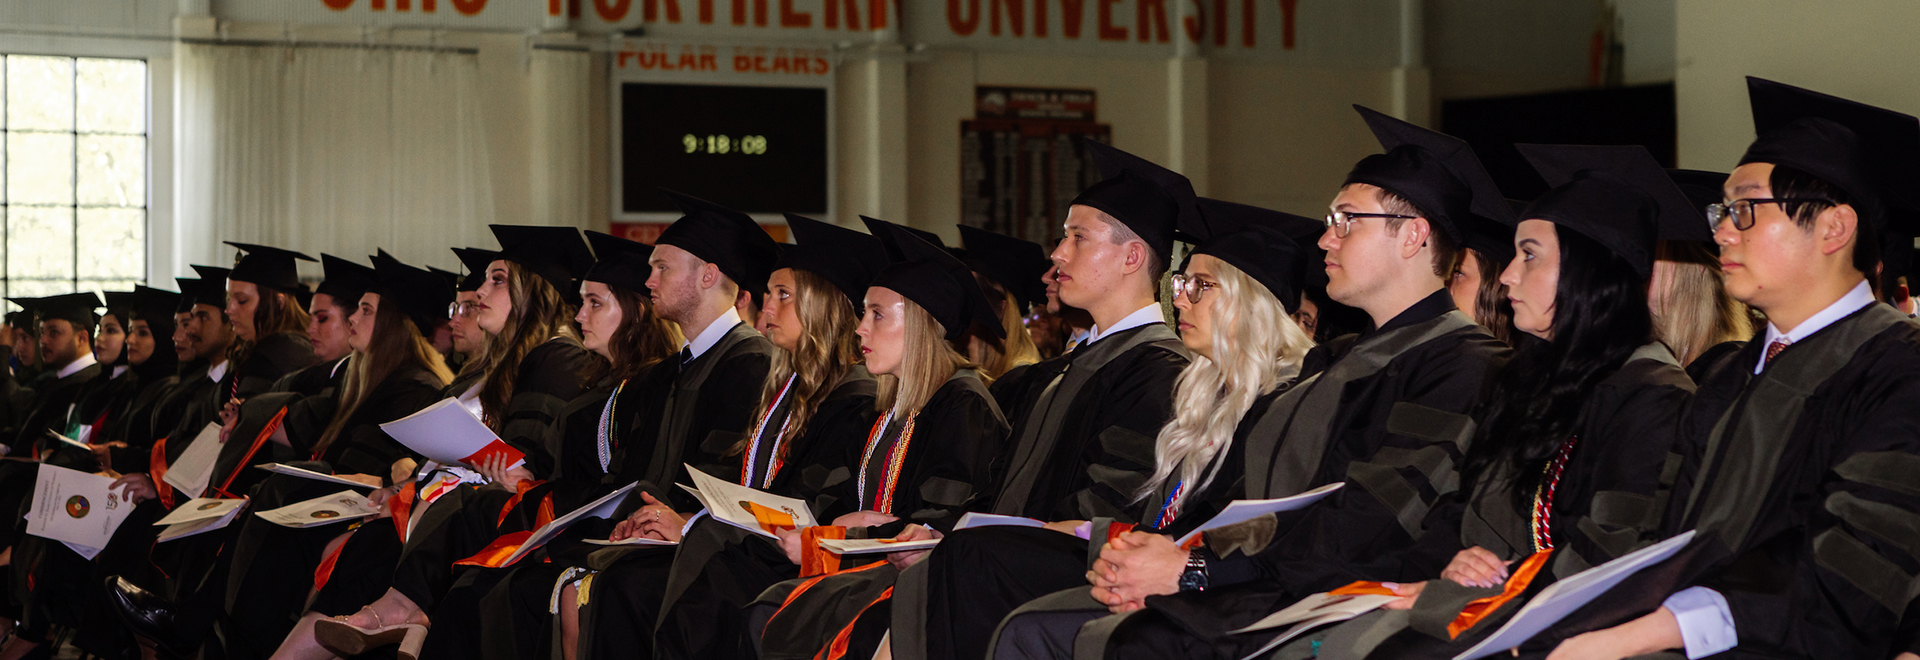 Photo of Graduates sitting in a row watching the ceremony